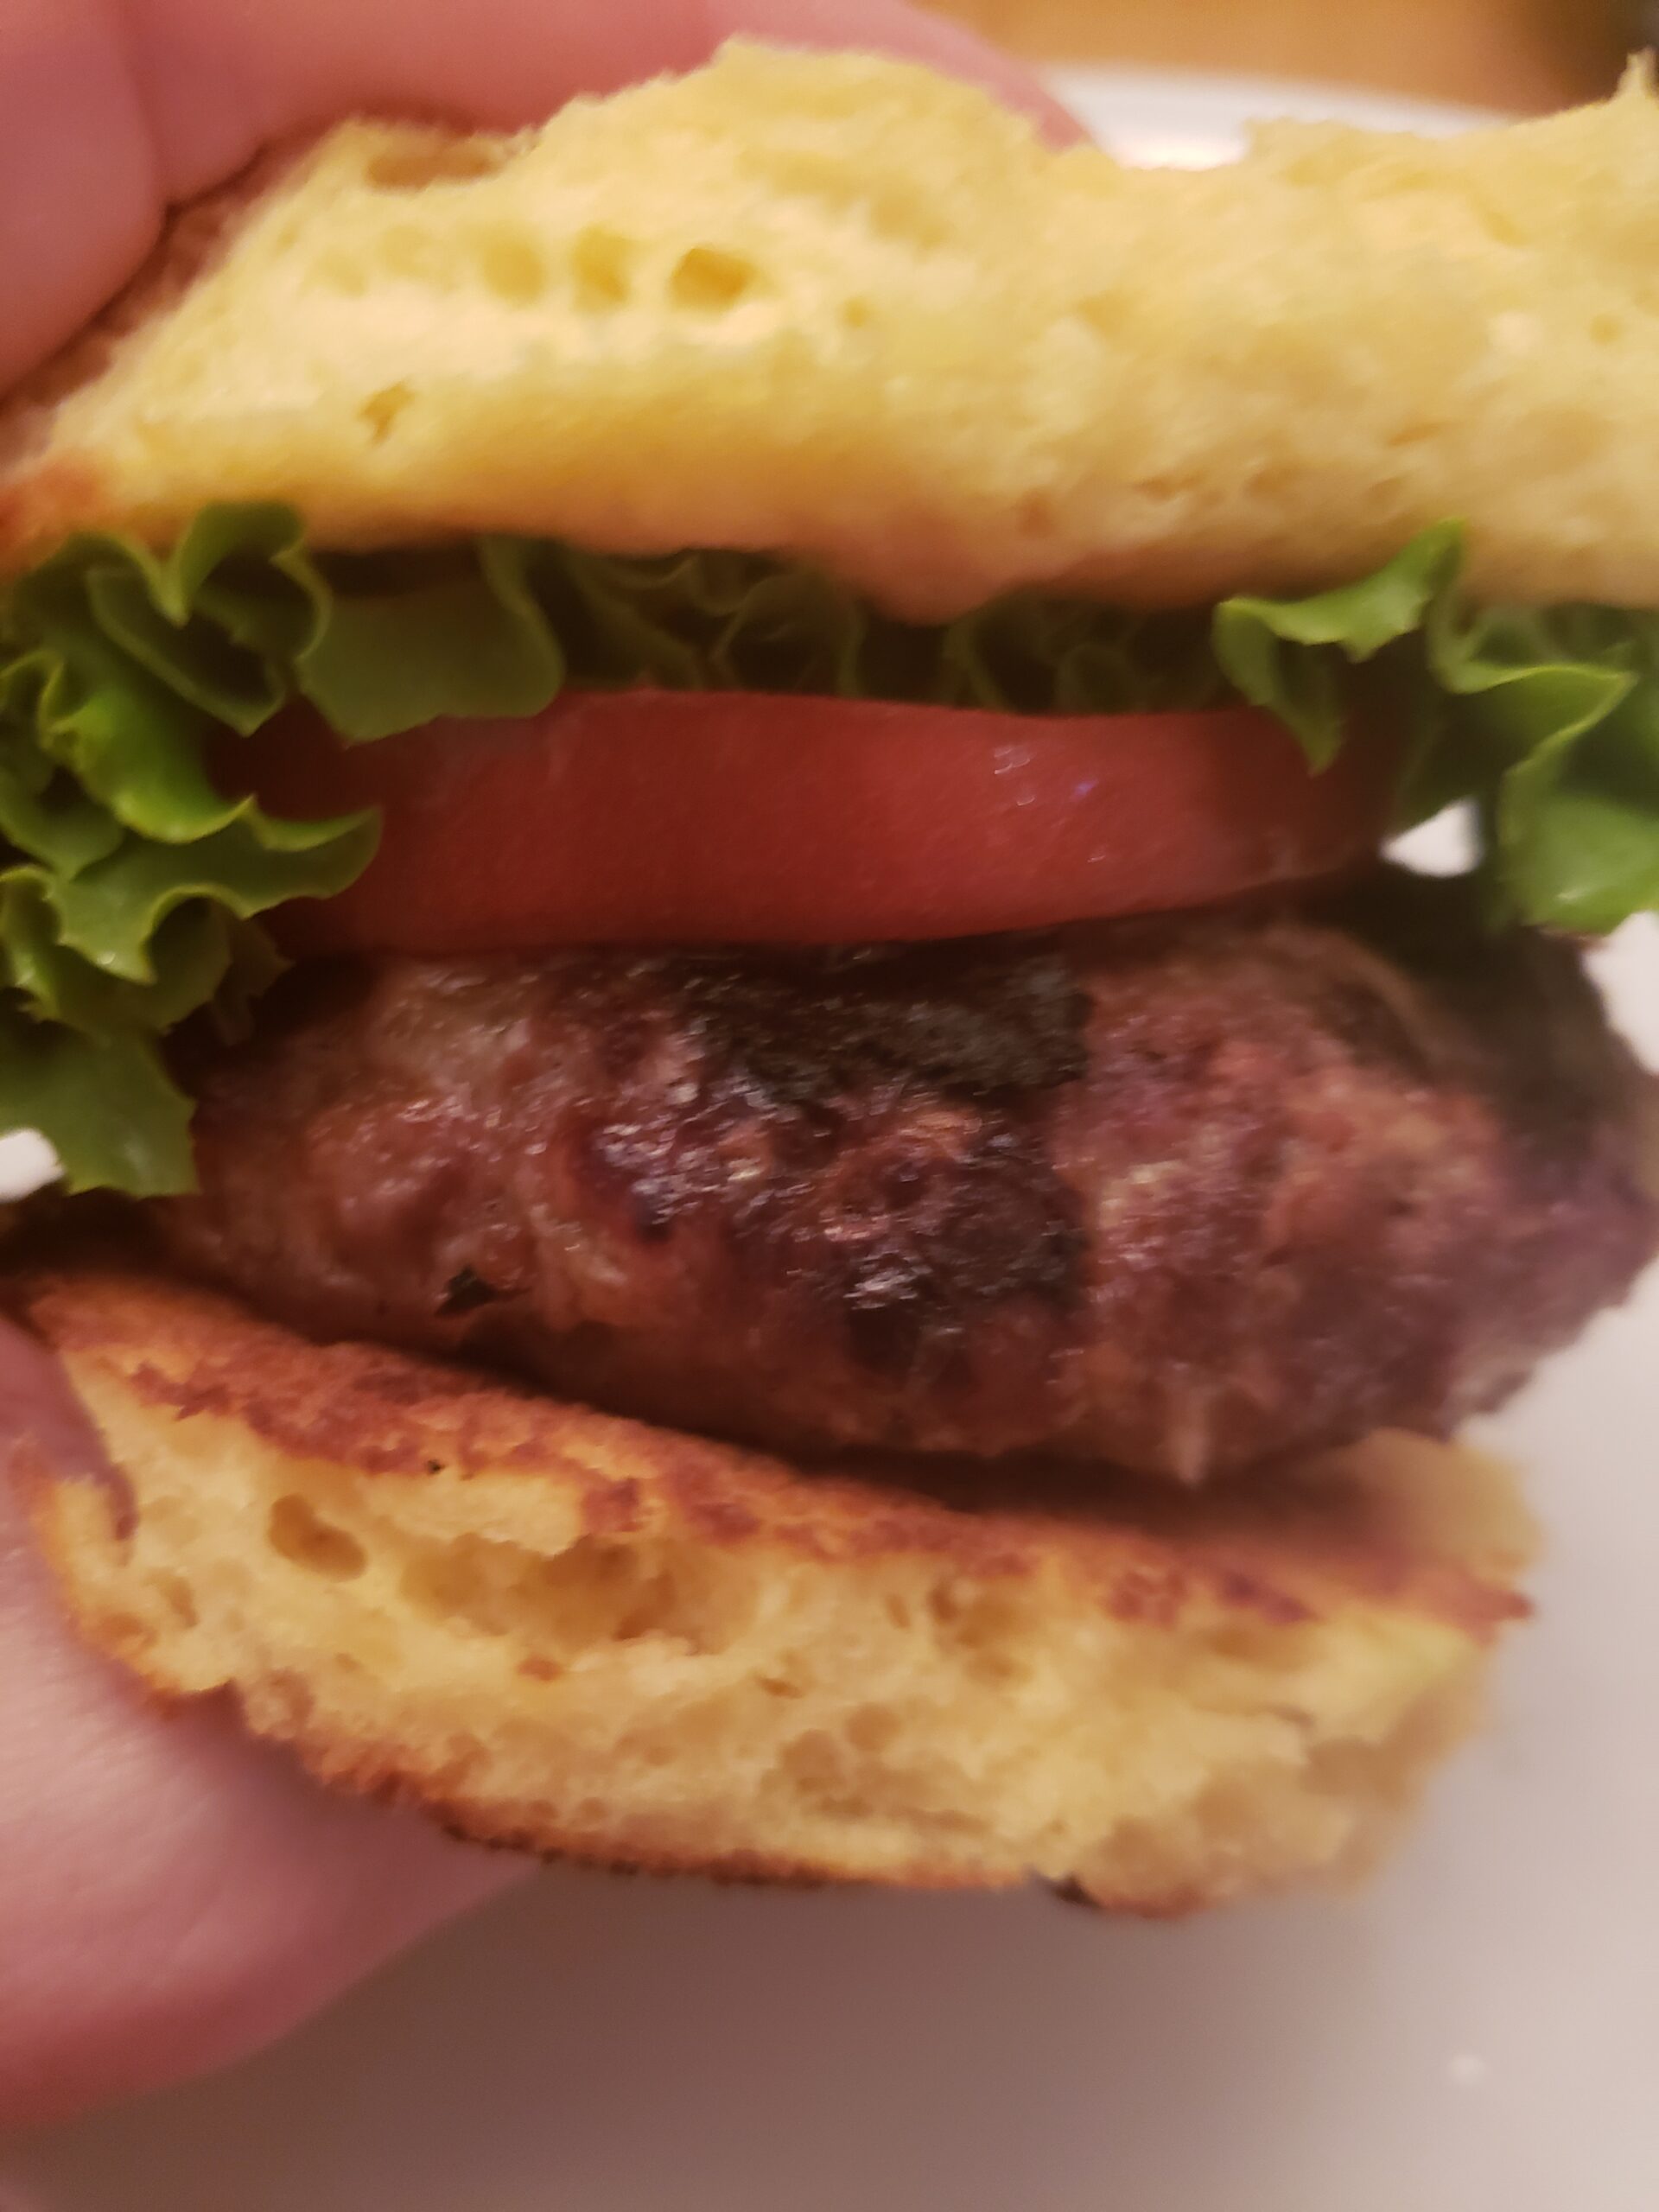 A Best Low Carb Burger in someone's hand ready to eat.